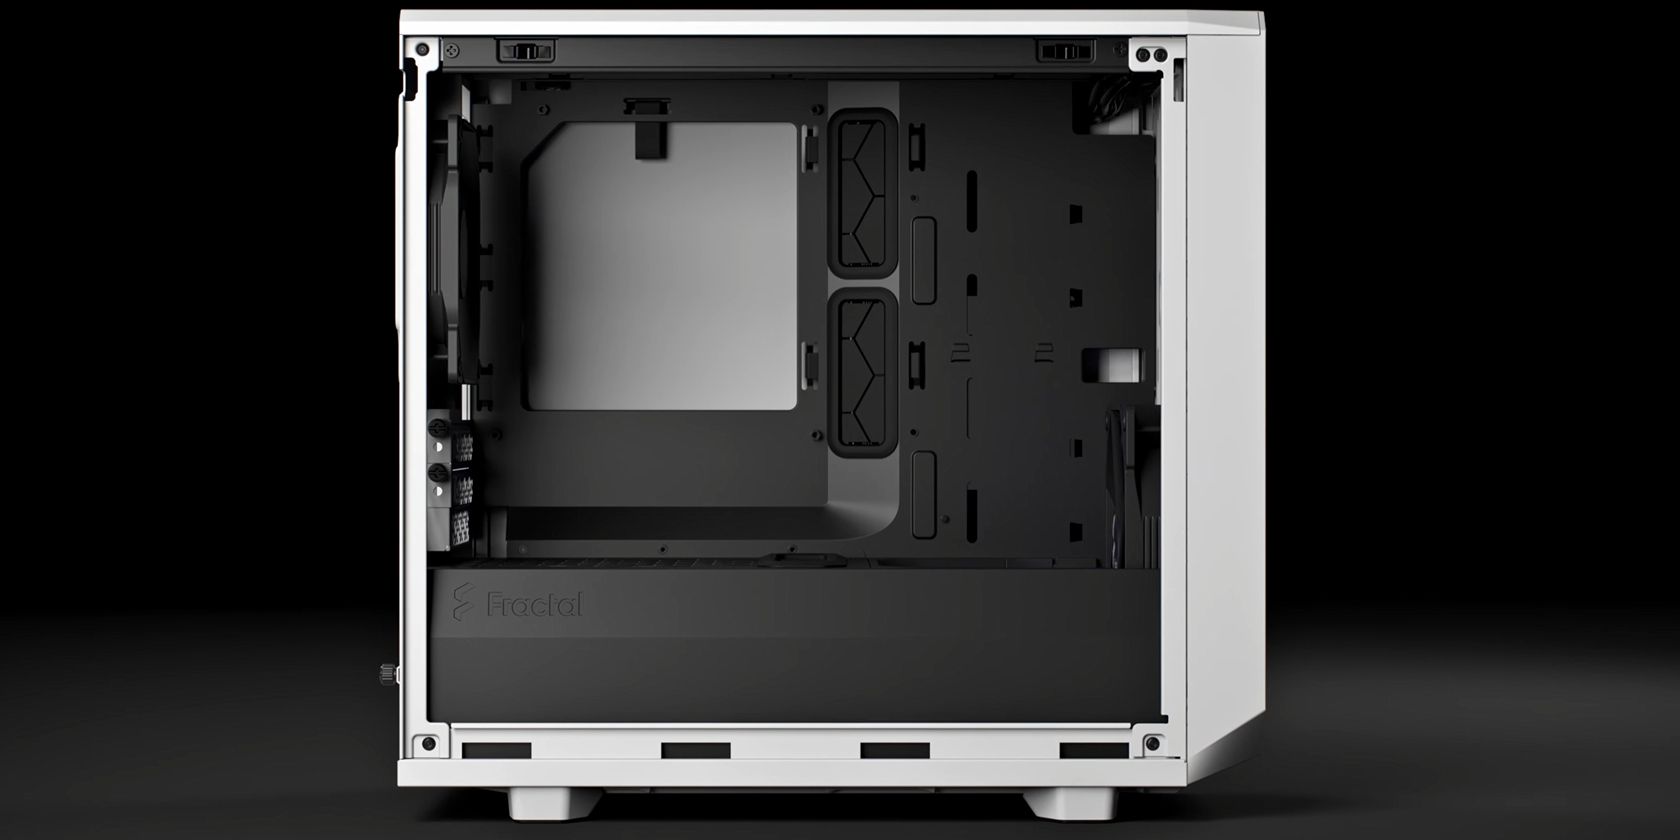 Image of a PC case from Fractal Design (Meshify 2 Nano)